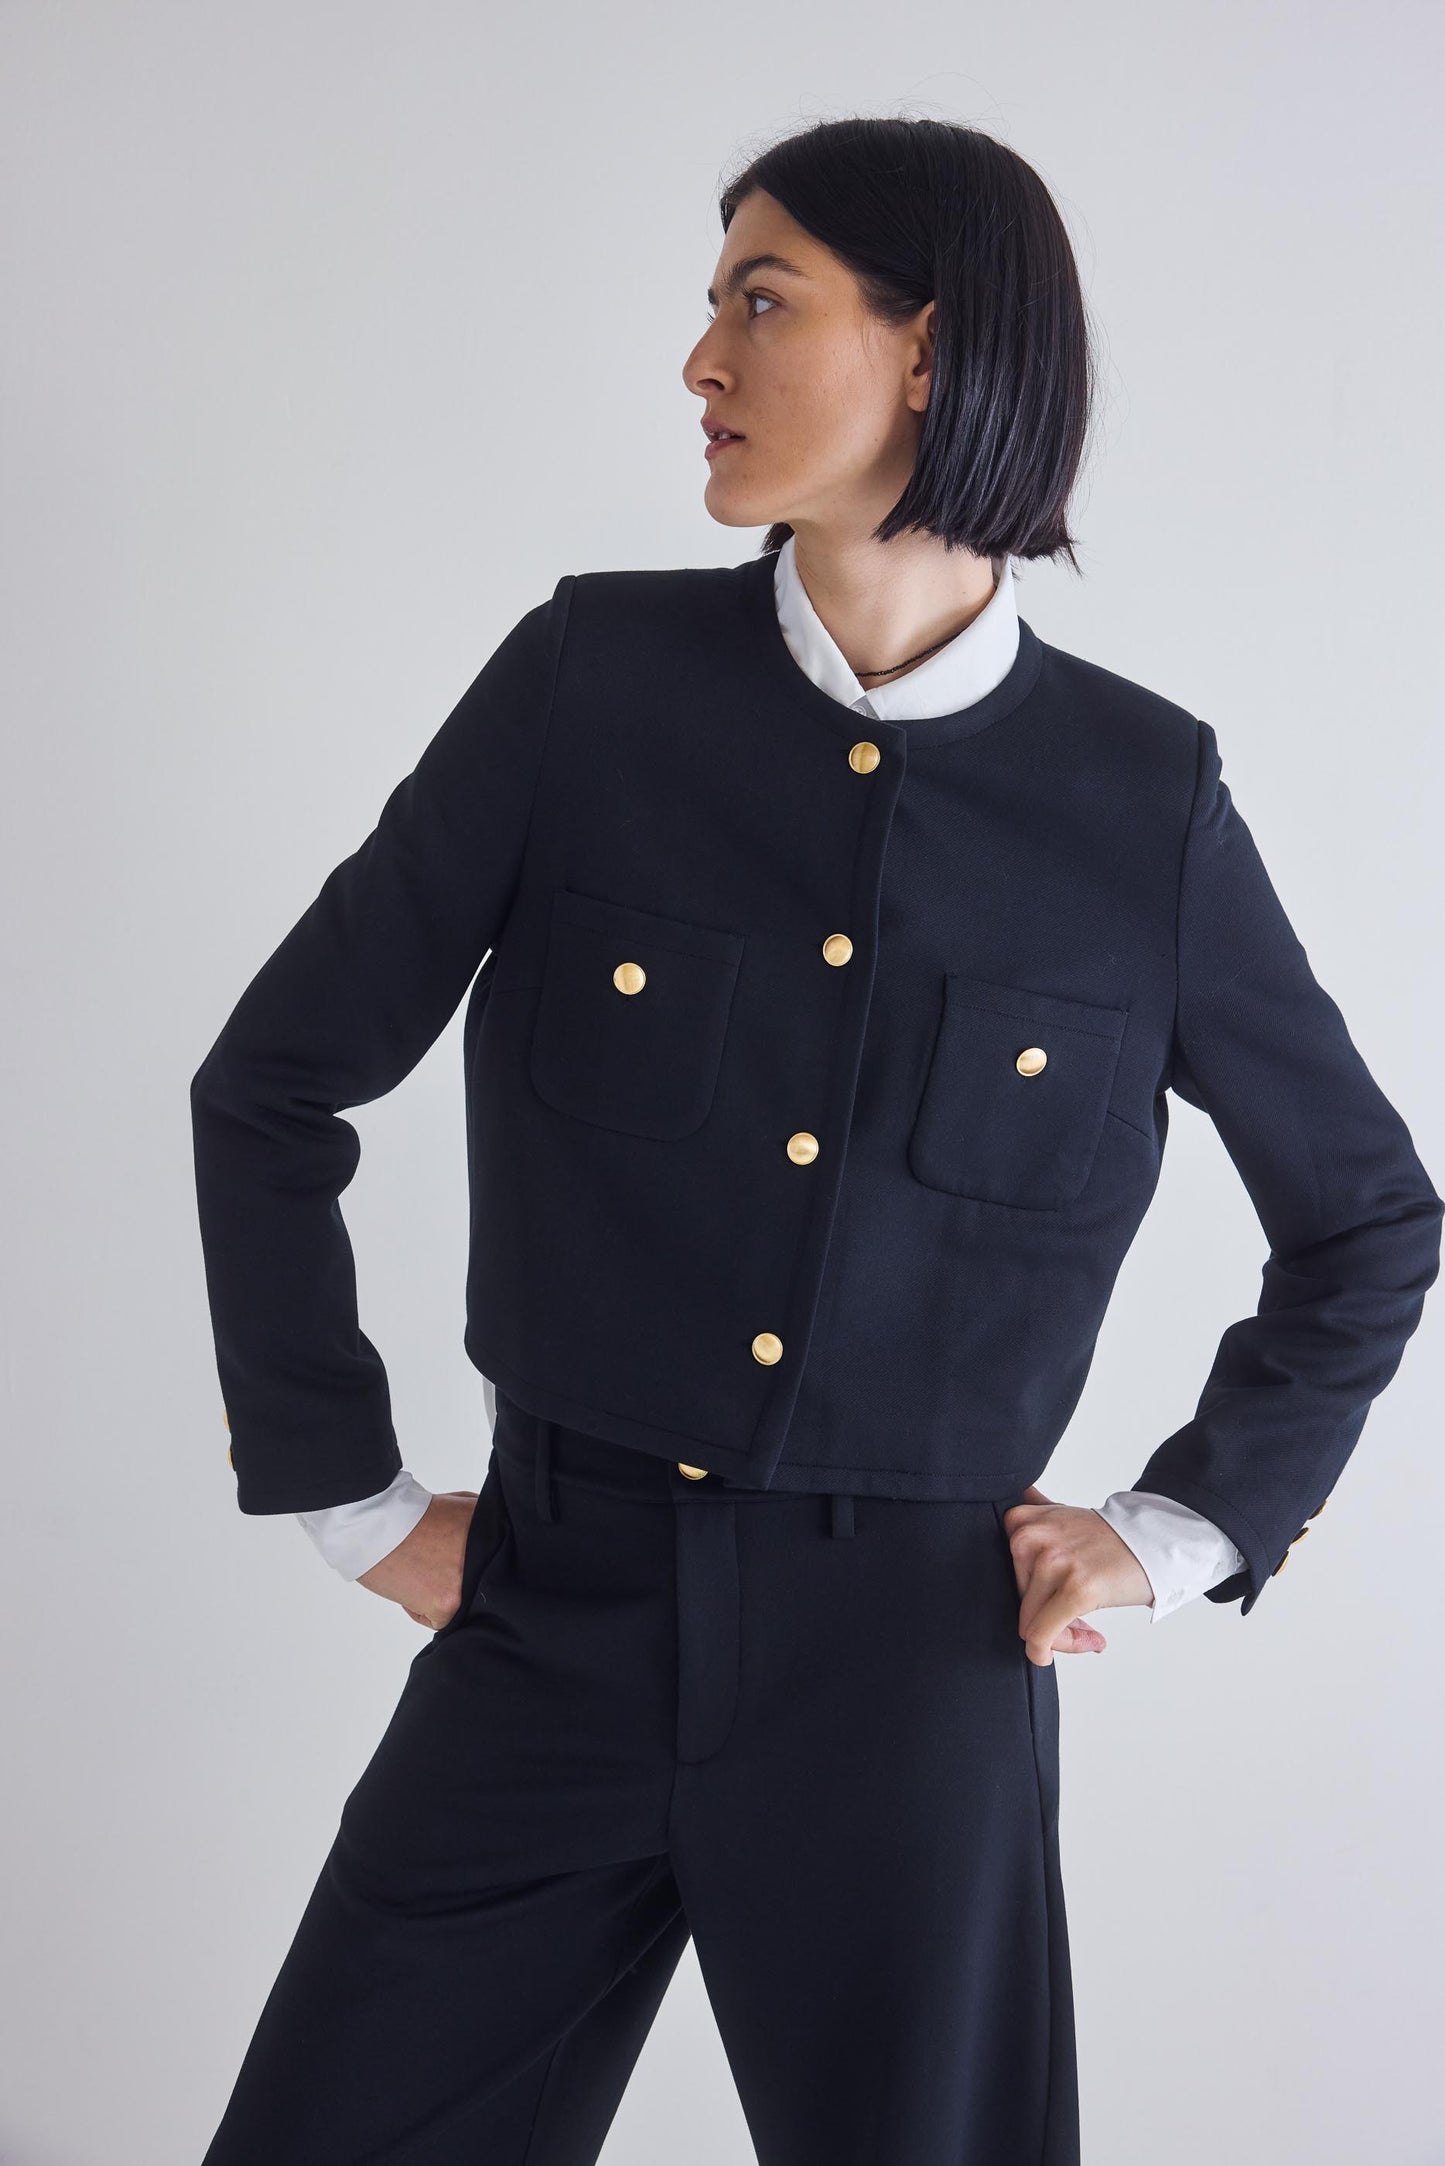 The Stretch Suit Classic Jacket